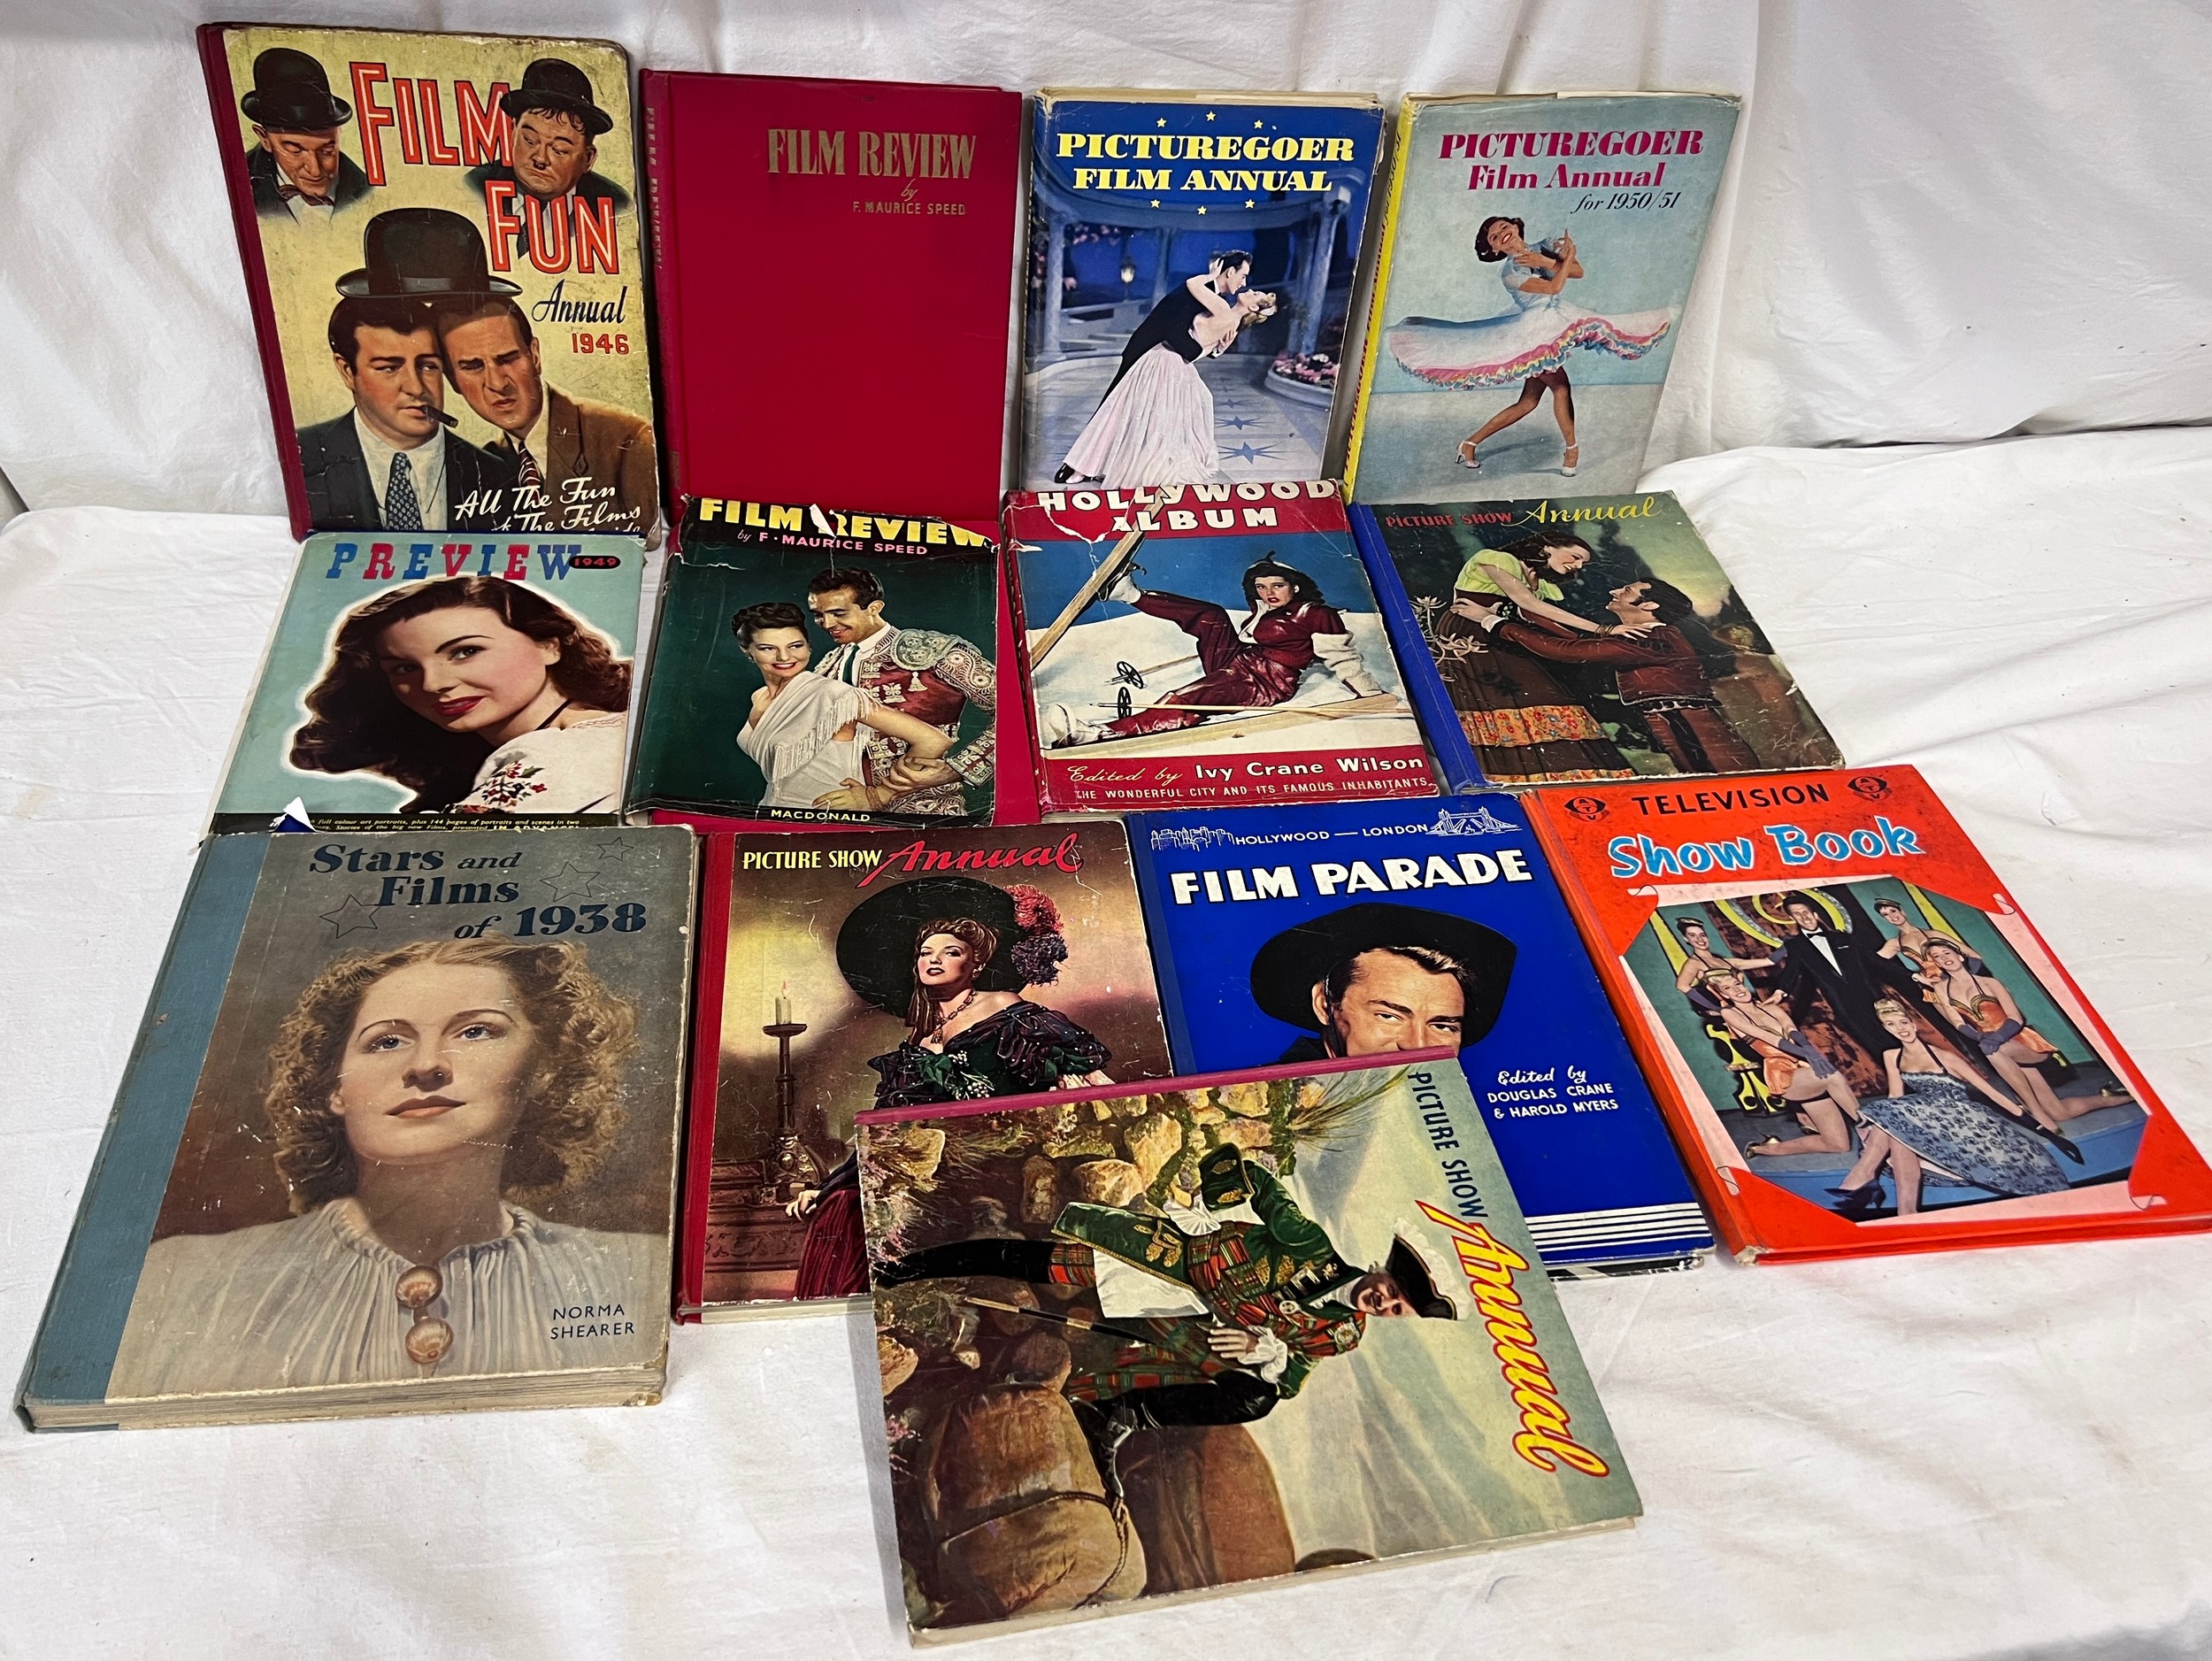 A collection of 1930's and 40's film and picture annuals to include Film Fun Annual 1946, Stars &